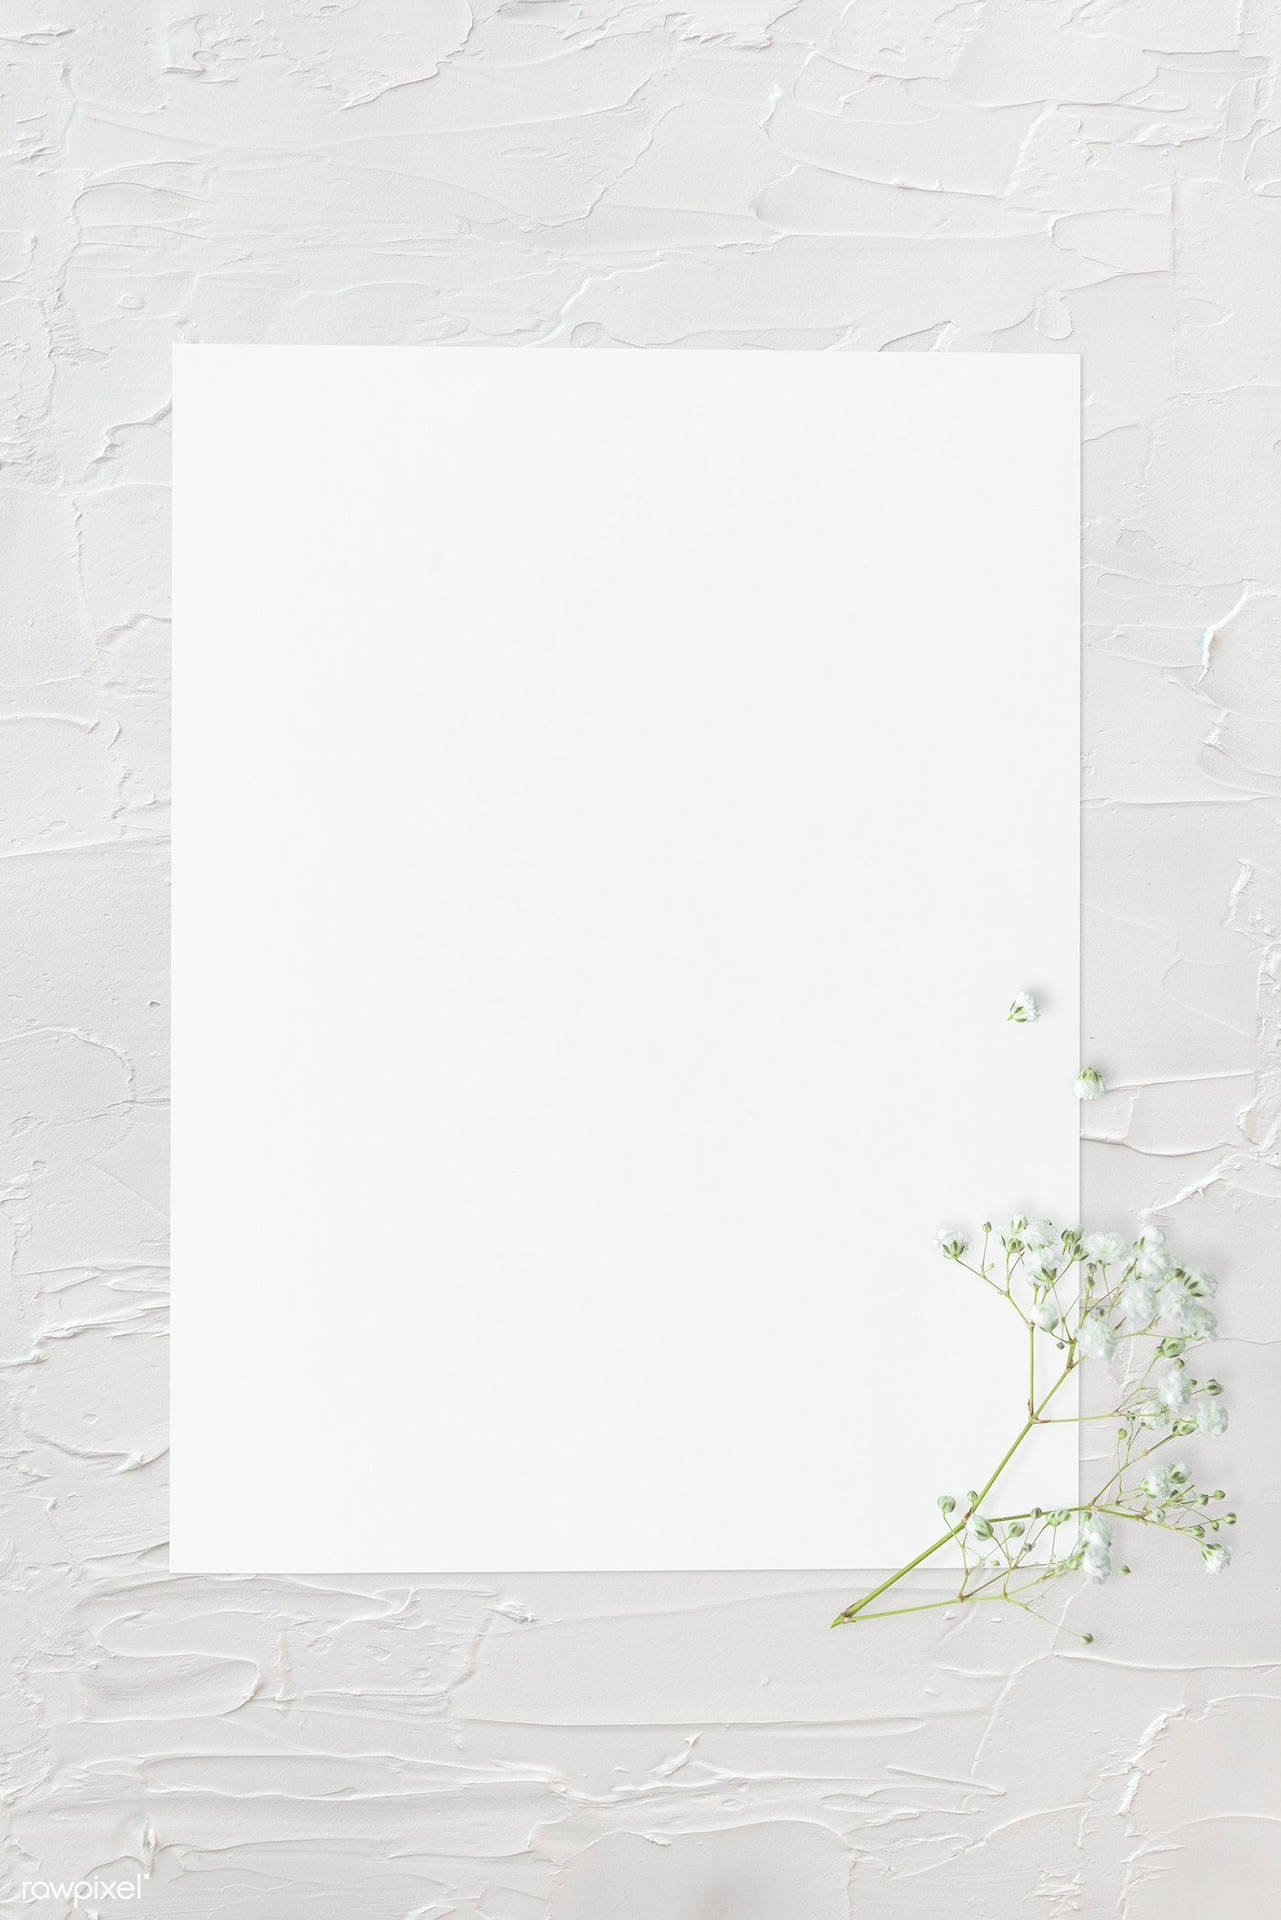 Blank White With Frame And White Flowers Picture